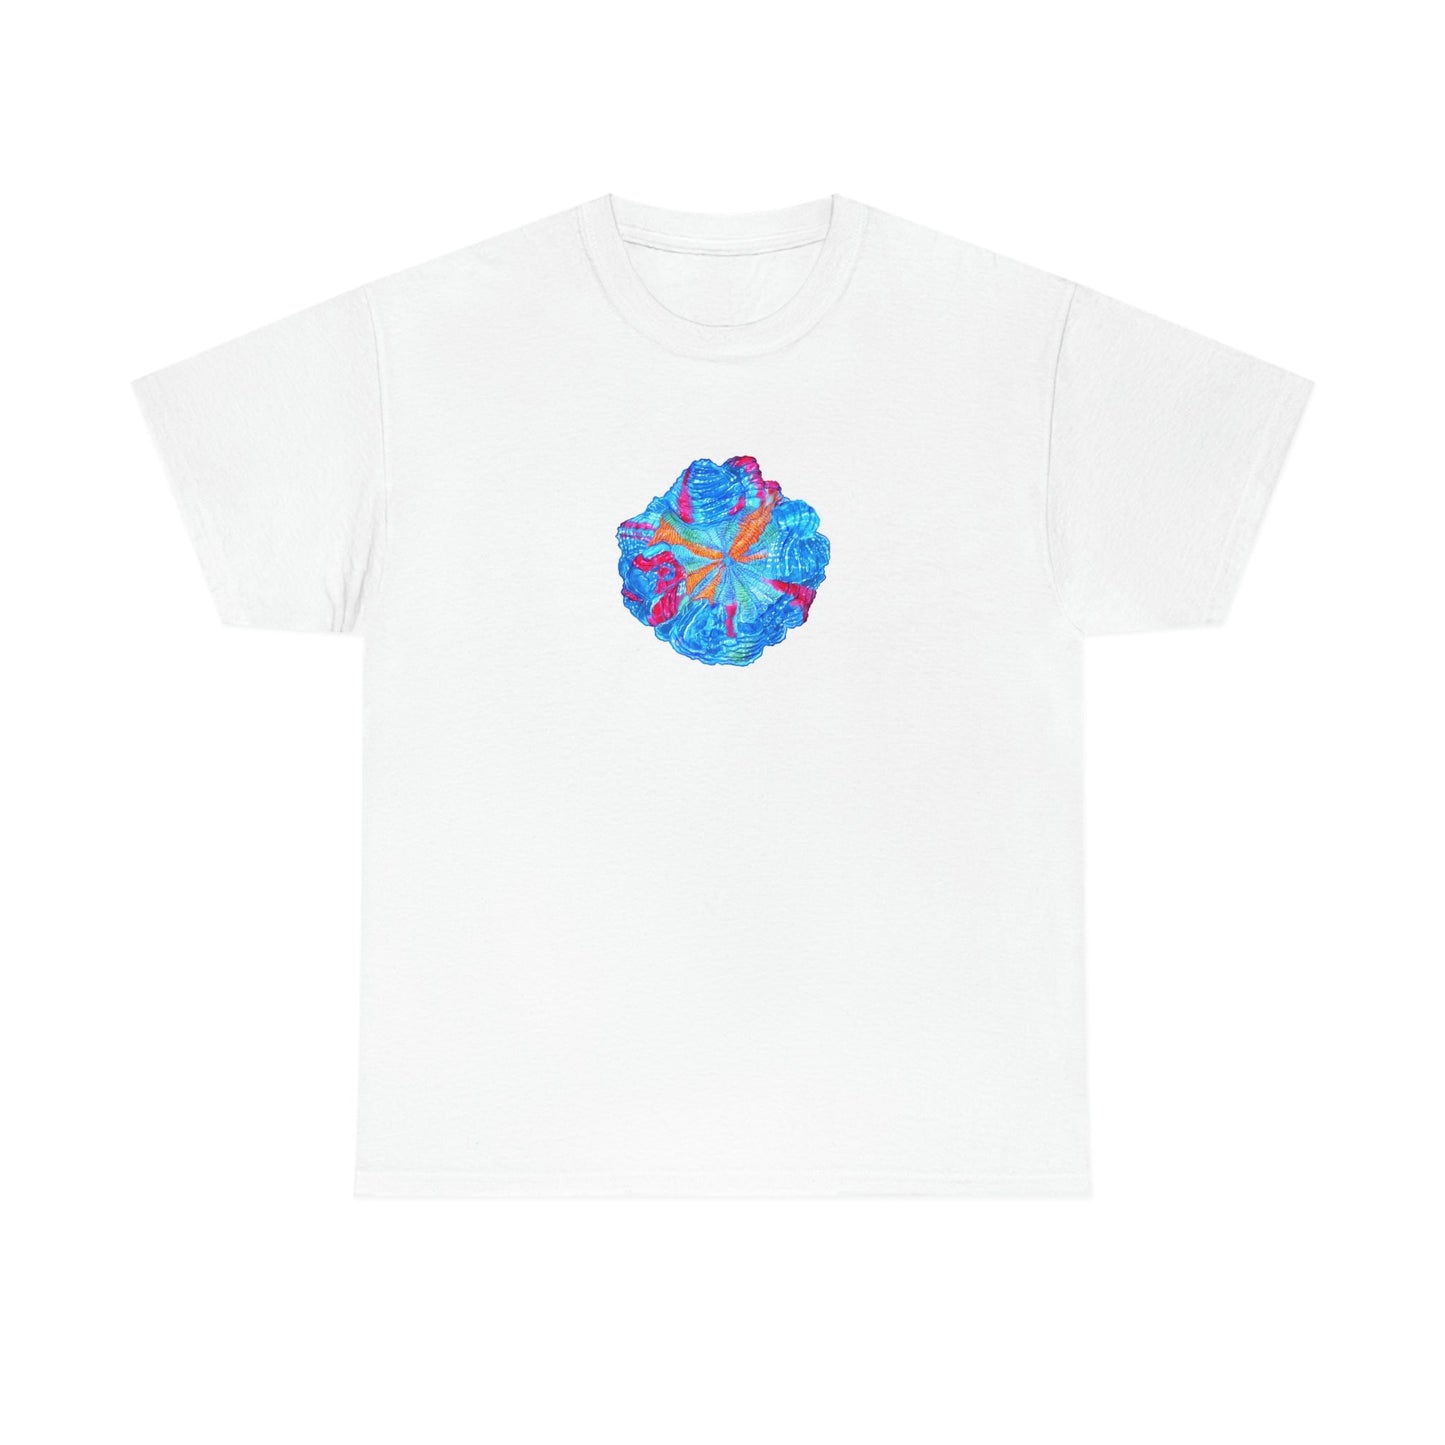 Simple Acantho Coral Shirt - Reef of Clowns